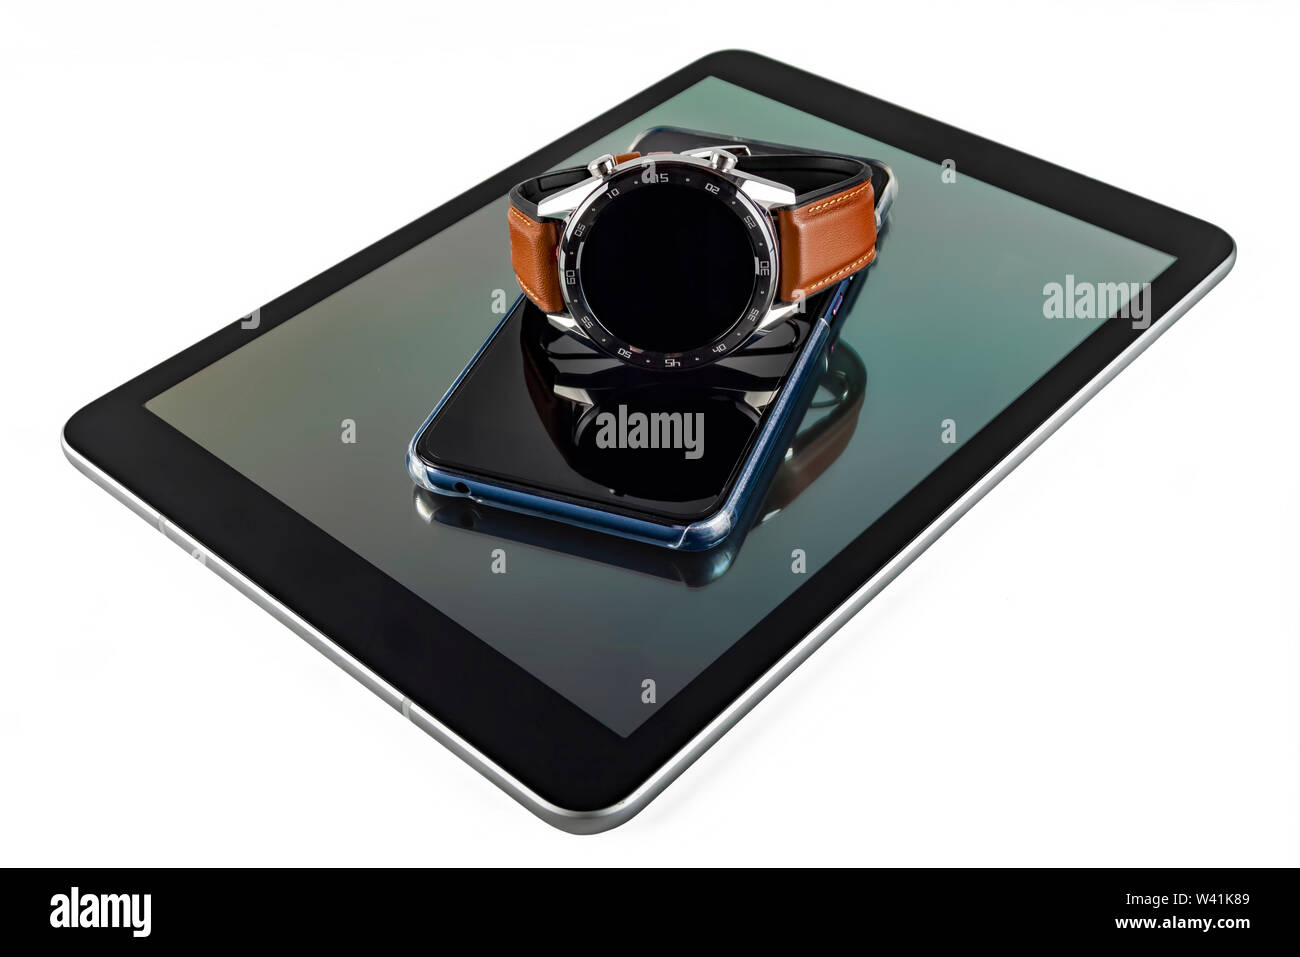 Smart phone tablet laptop smartwatch Cut Out Stock Images & Pictures - Alamy